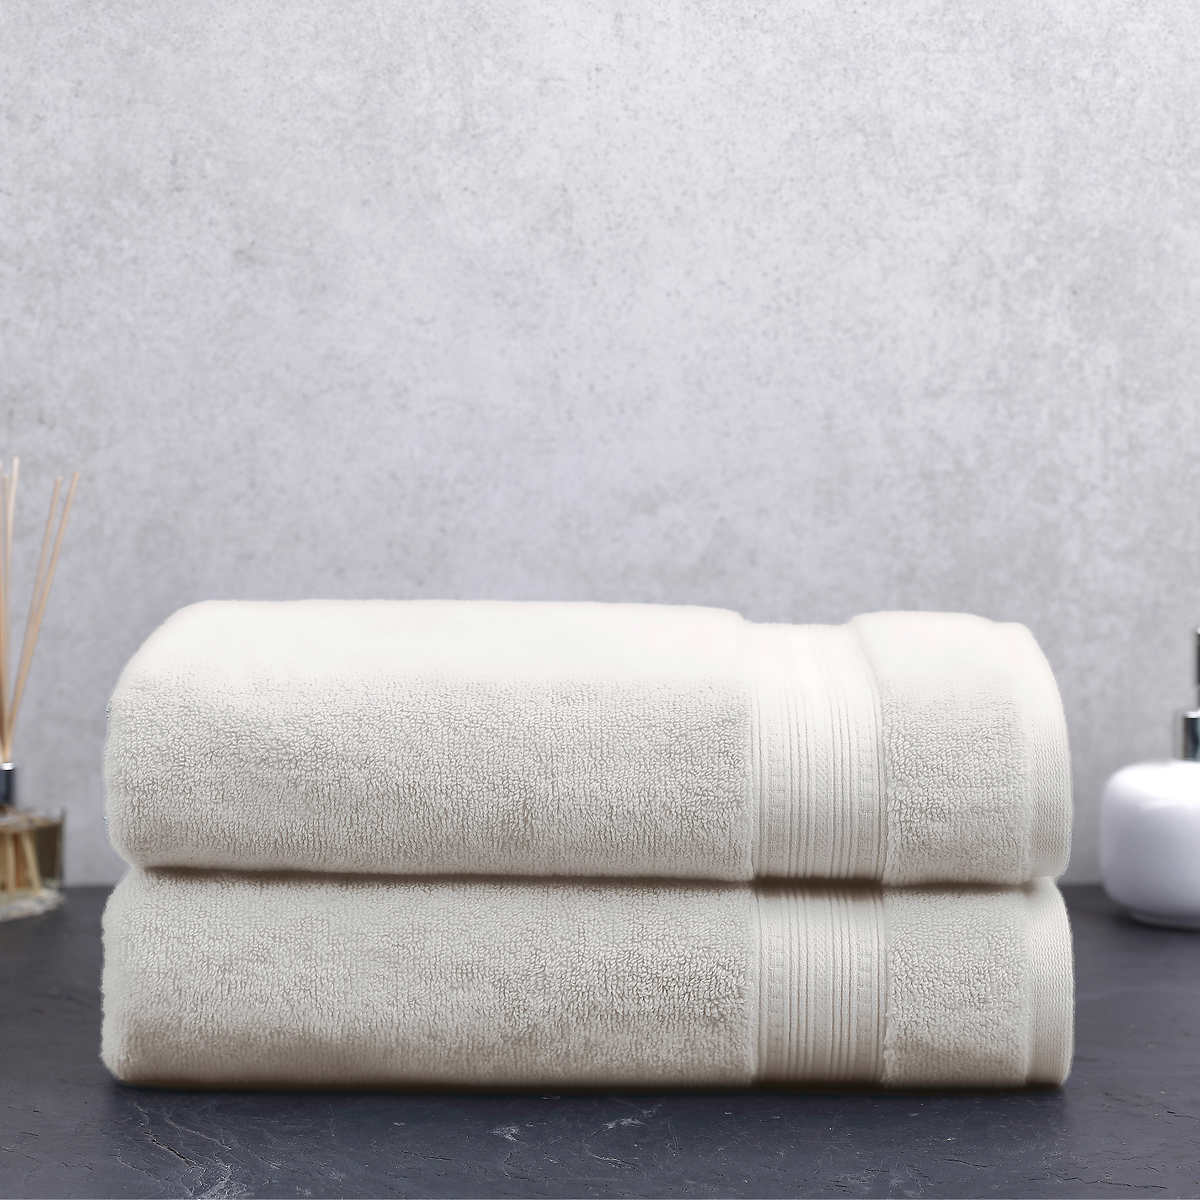 Charisma towels on clearance for $5.97 and $9.97 : r/Costco